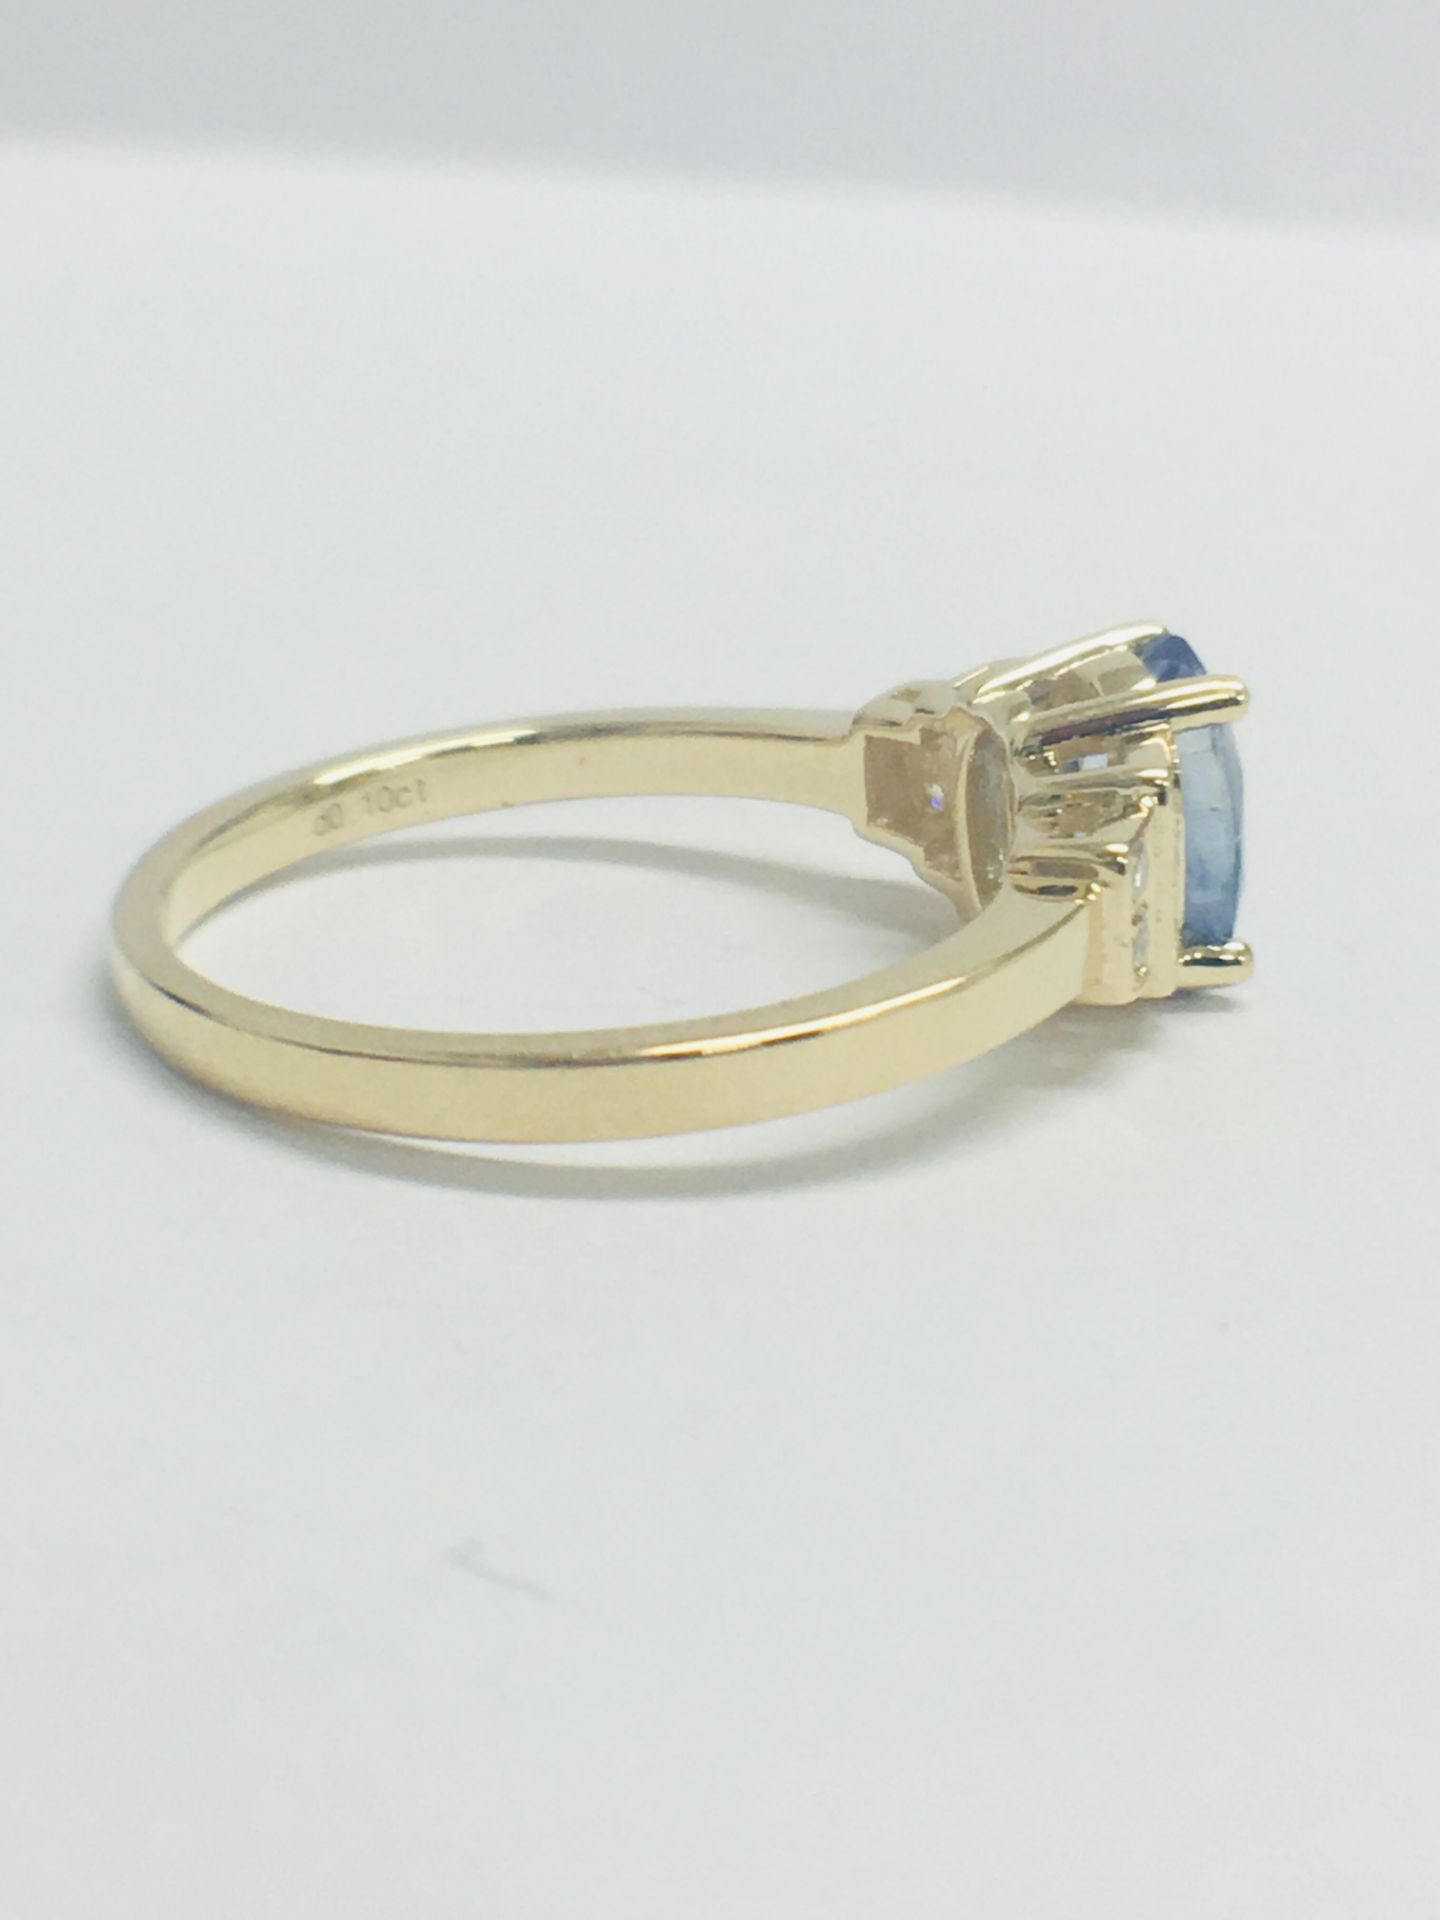 14ct Yellow Gold Sapphire and Diamond Ring. - Image 7 of 10